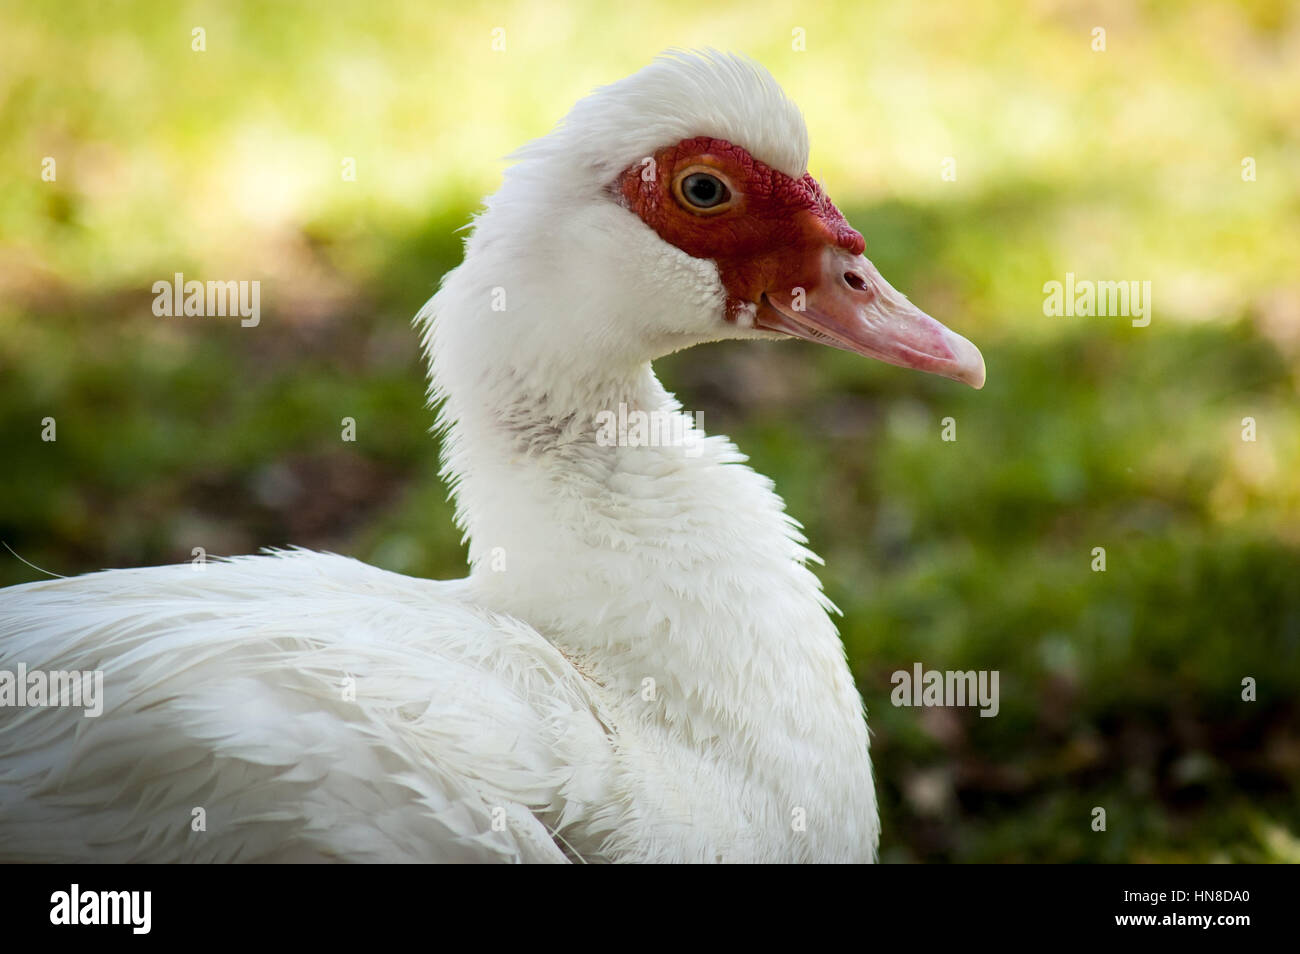 White duck with red face Stock Photo - Alamy